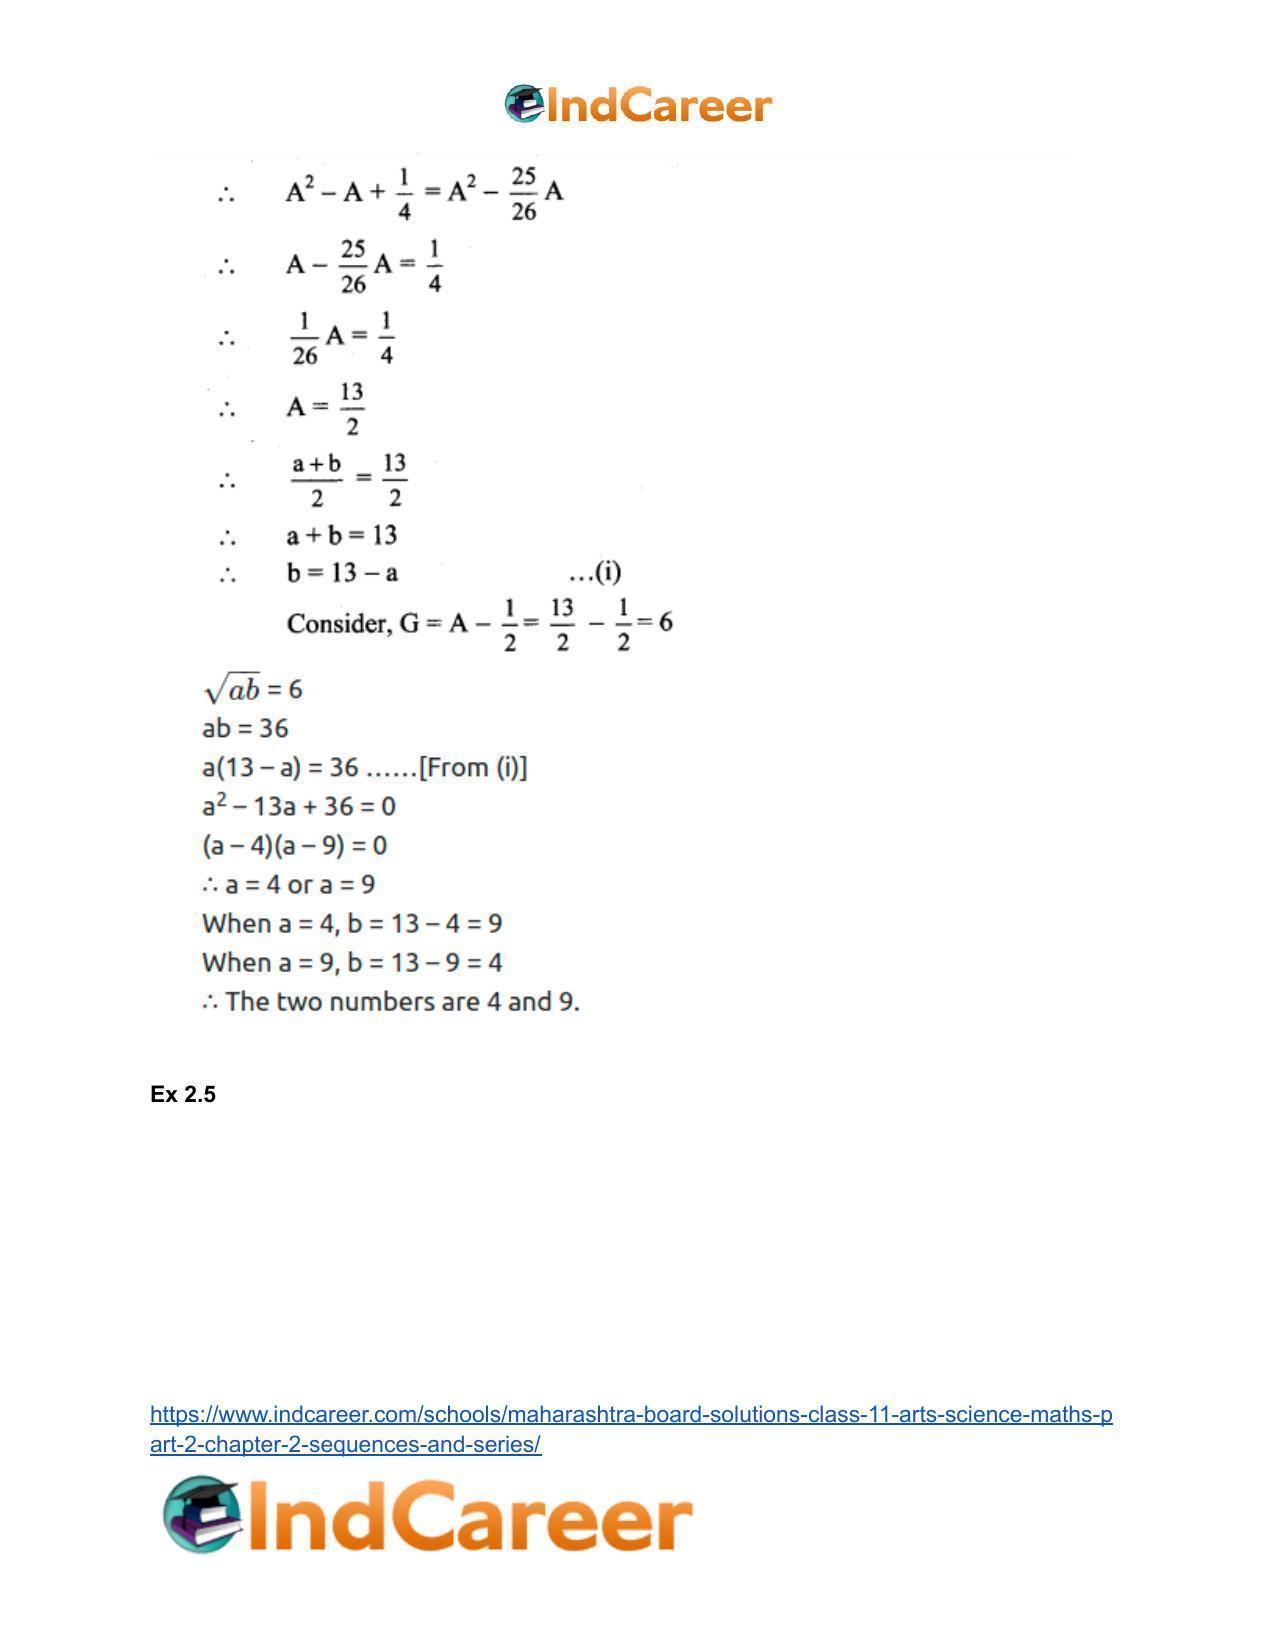 Maharashtra Board Solutions Class 11-Arts & Science Maths (Part 2): Chapter 2- Sequences and Series - Page 59